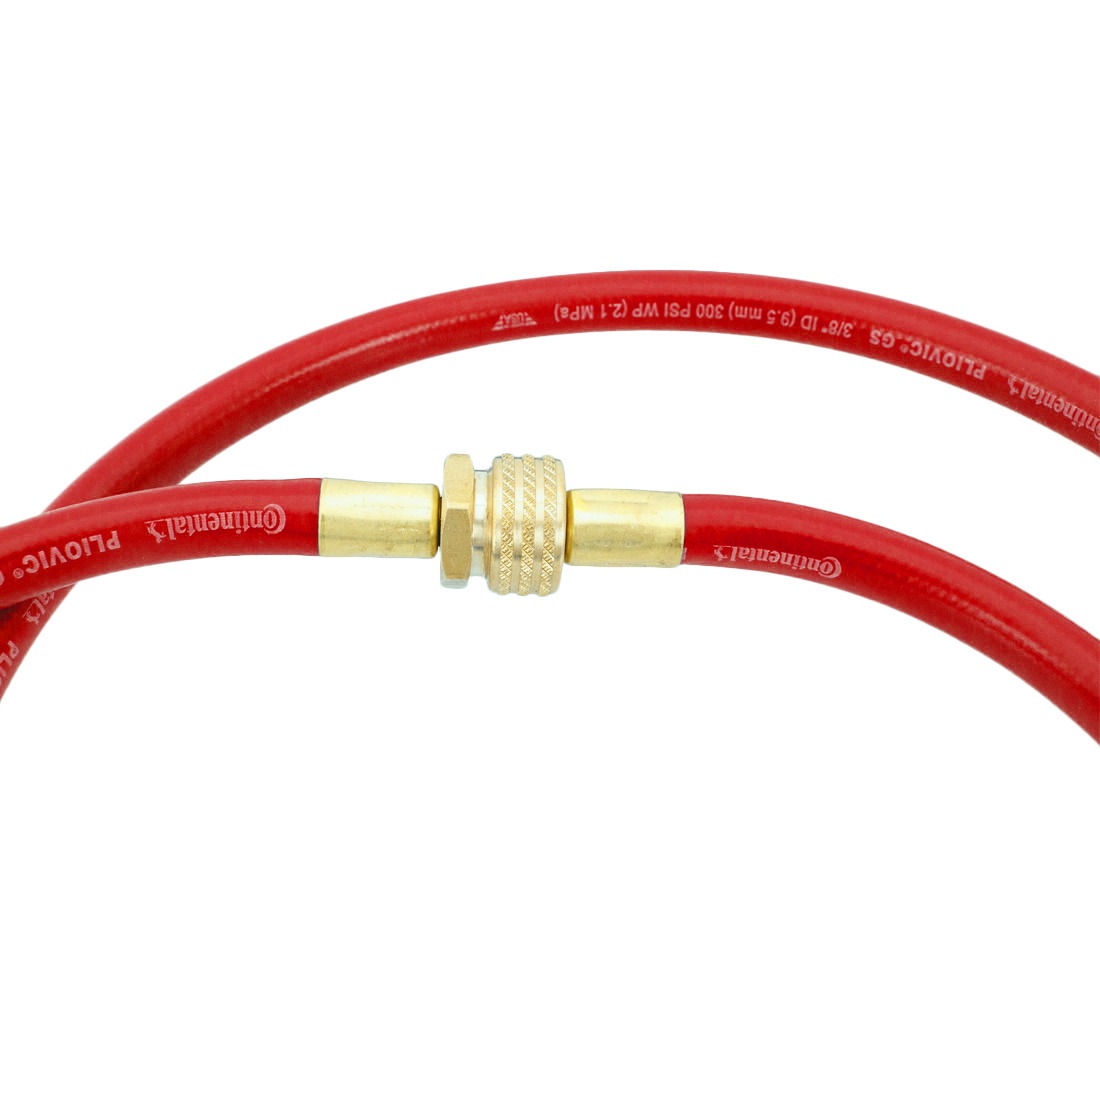 XERO Whip Line / Upgraded Waste Line - 6 Foot Red Hose Brass Fittings Close-Up View